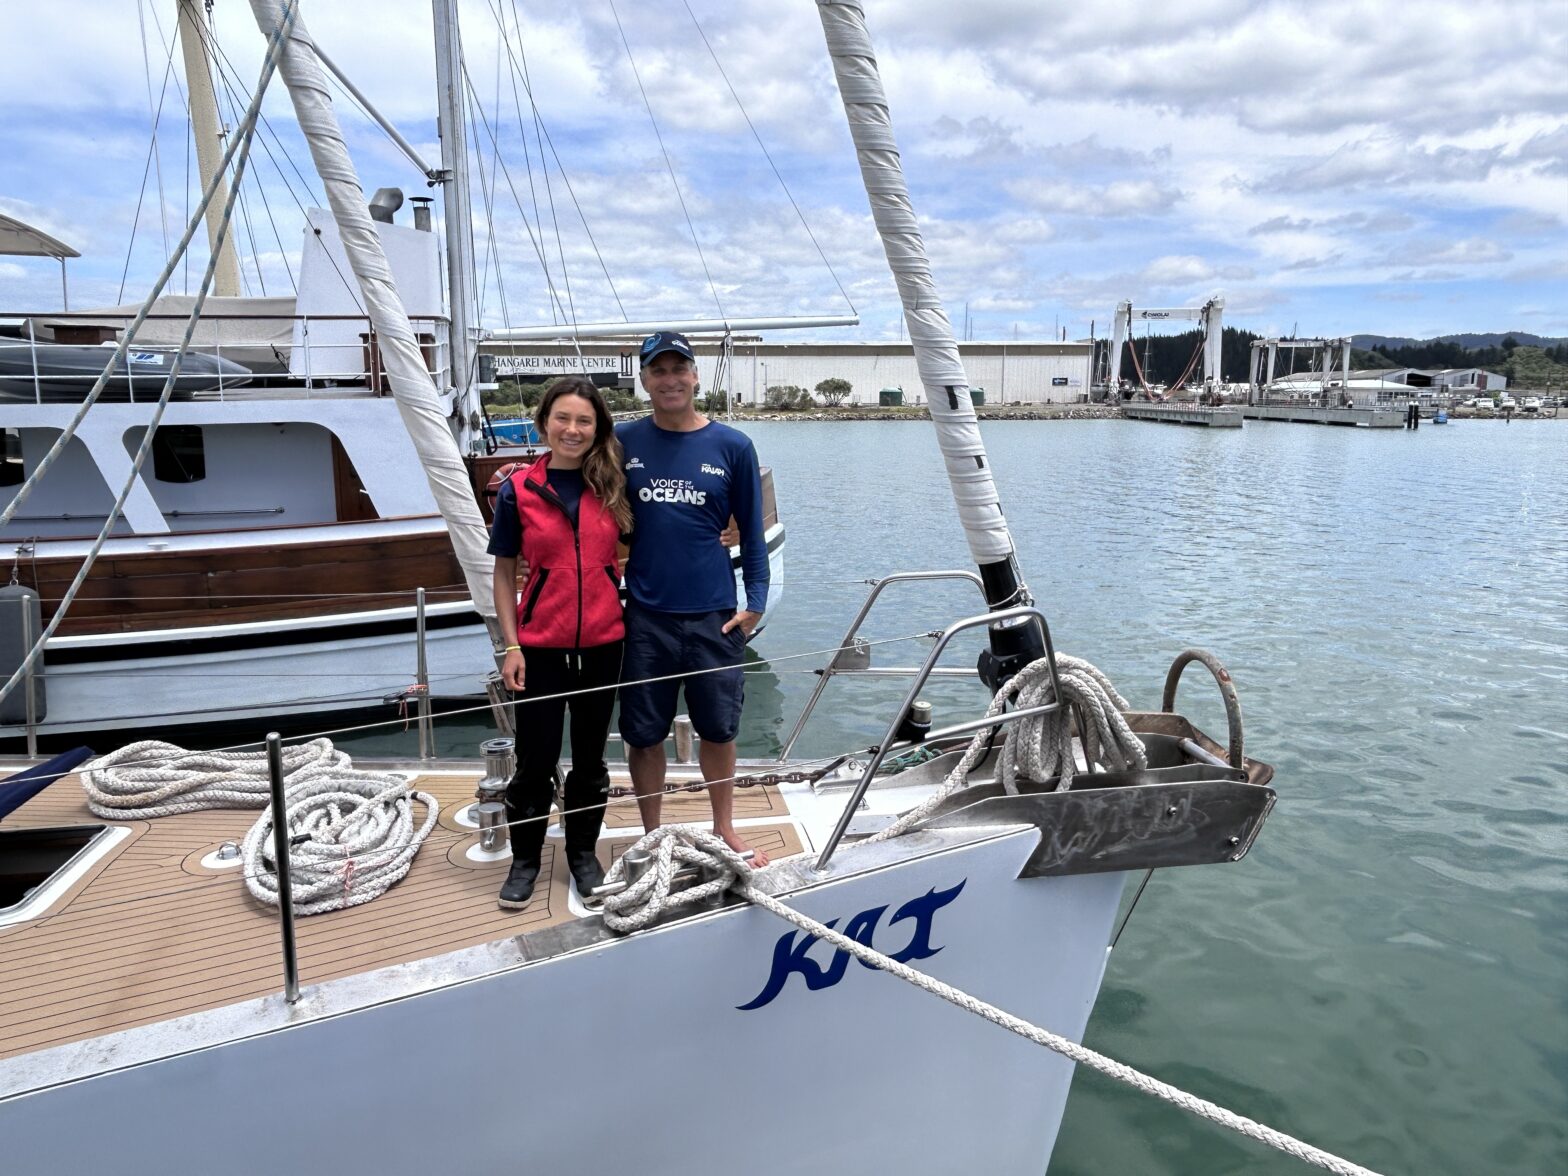 Voice of the Oceans crew standing on Kat, their sailing catamaran